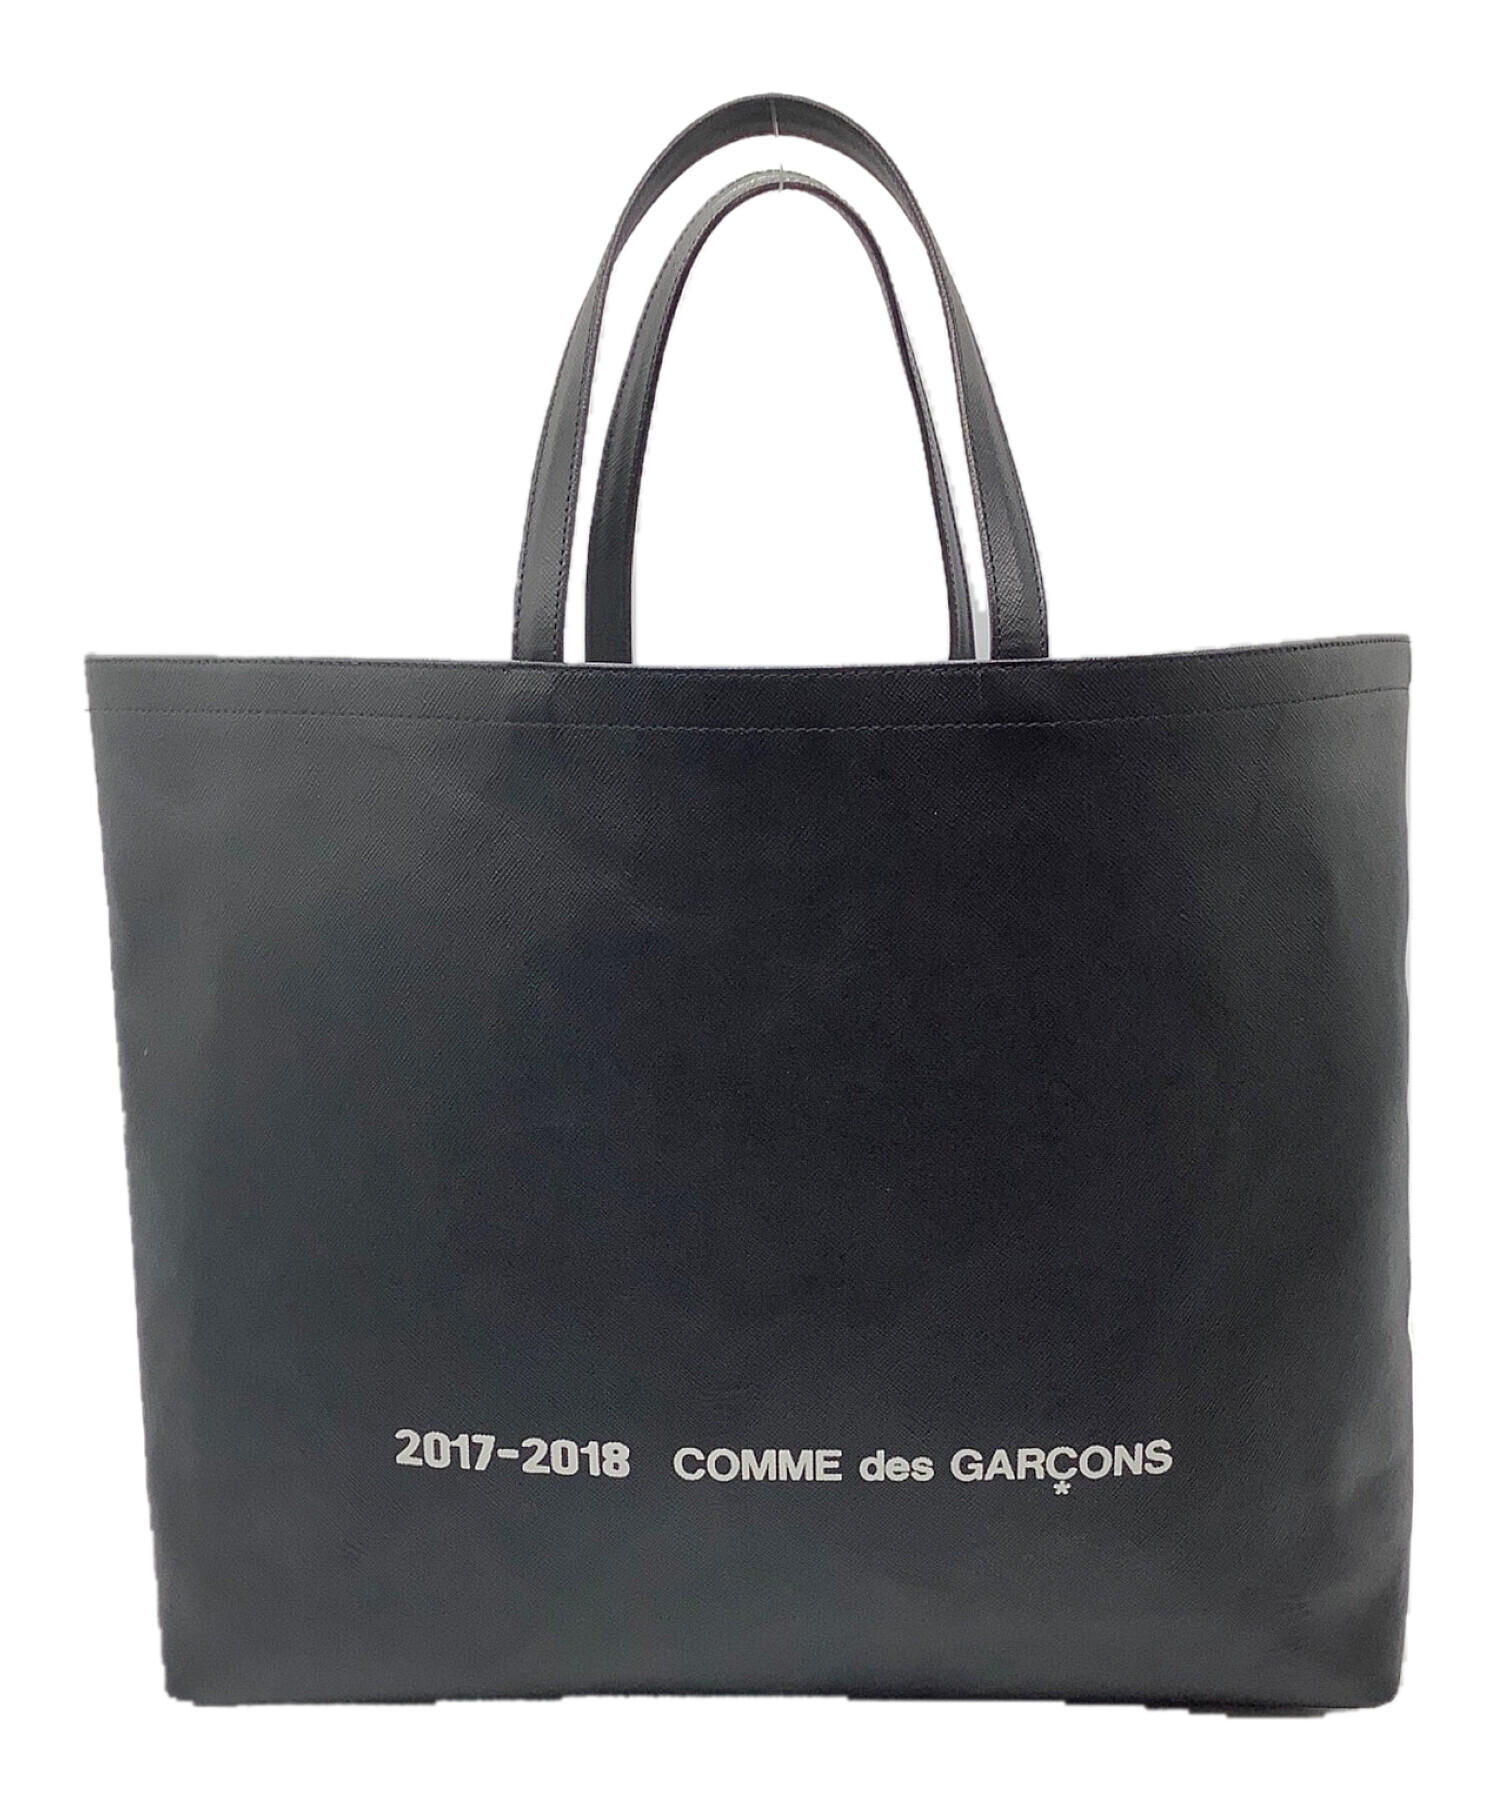 COMME des GARCONS コムデギャルソン トートバッグ - 黒